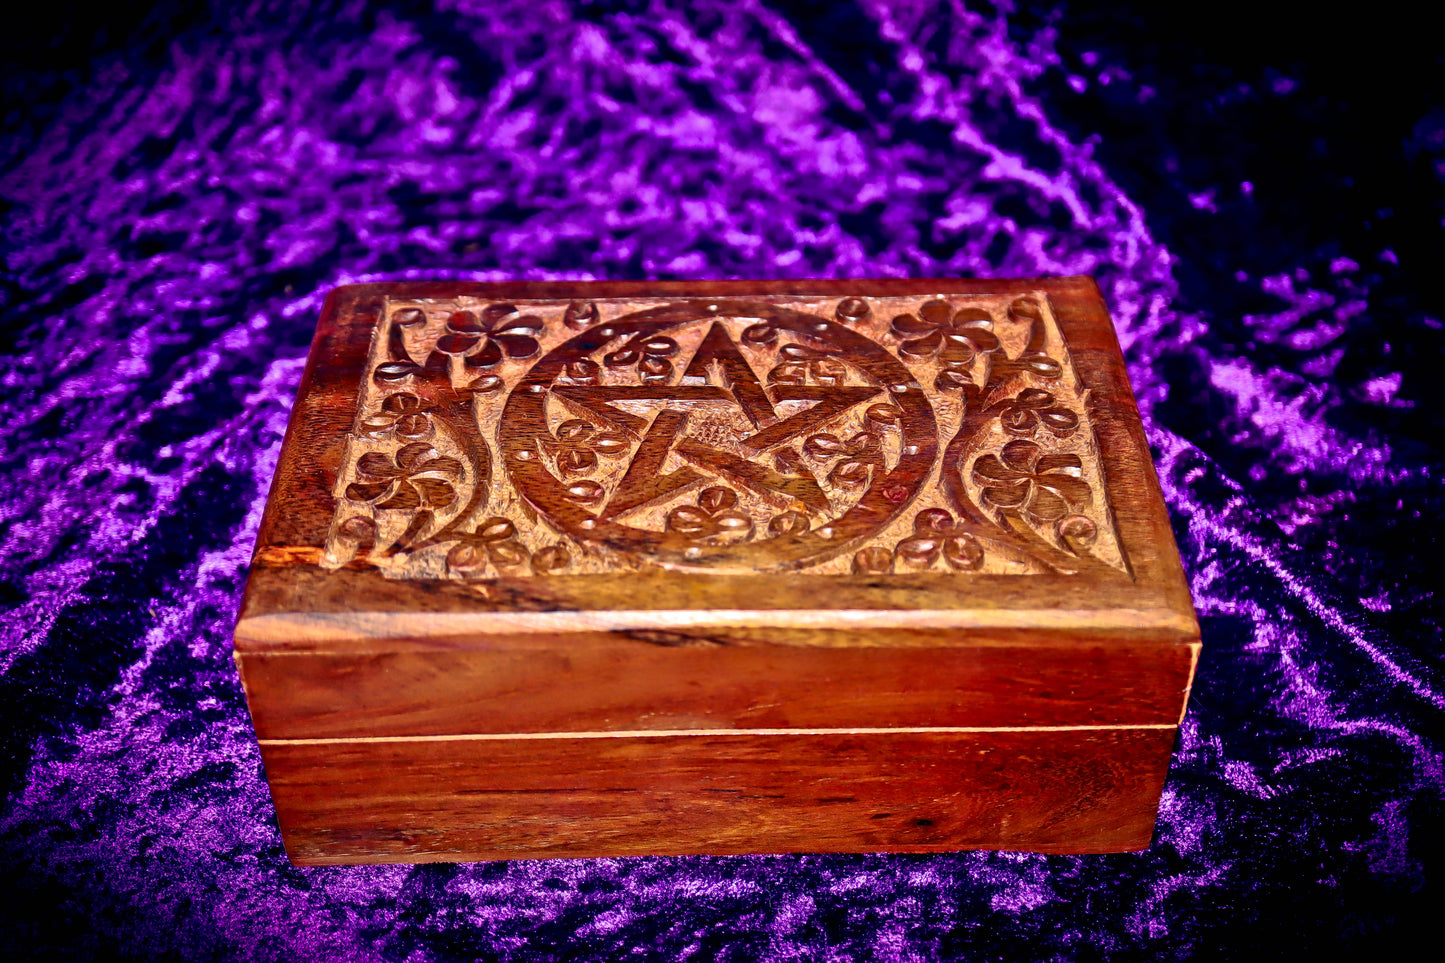 ** SPELL BOX ** SACRED CHARGING BOX PORTAL CHEST! **RARE** Haunted Wiccan Pagan Occult Box! *** Amplify The Power of Any Metaphysical Item x10! Gain Wealth & Wishes! $$$ ~ 4x6 Inches